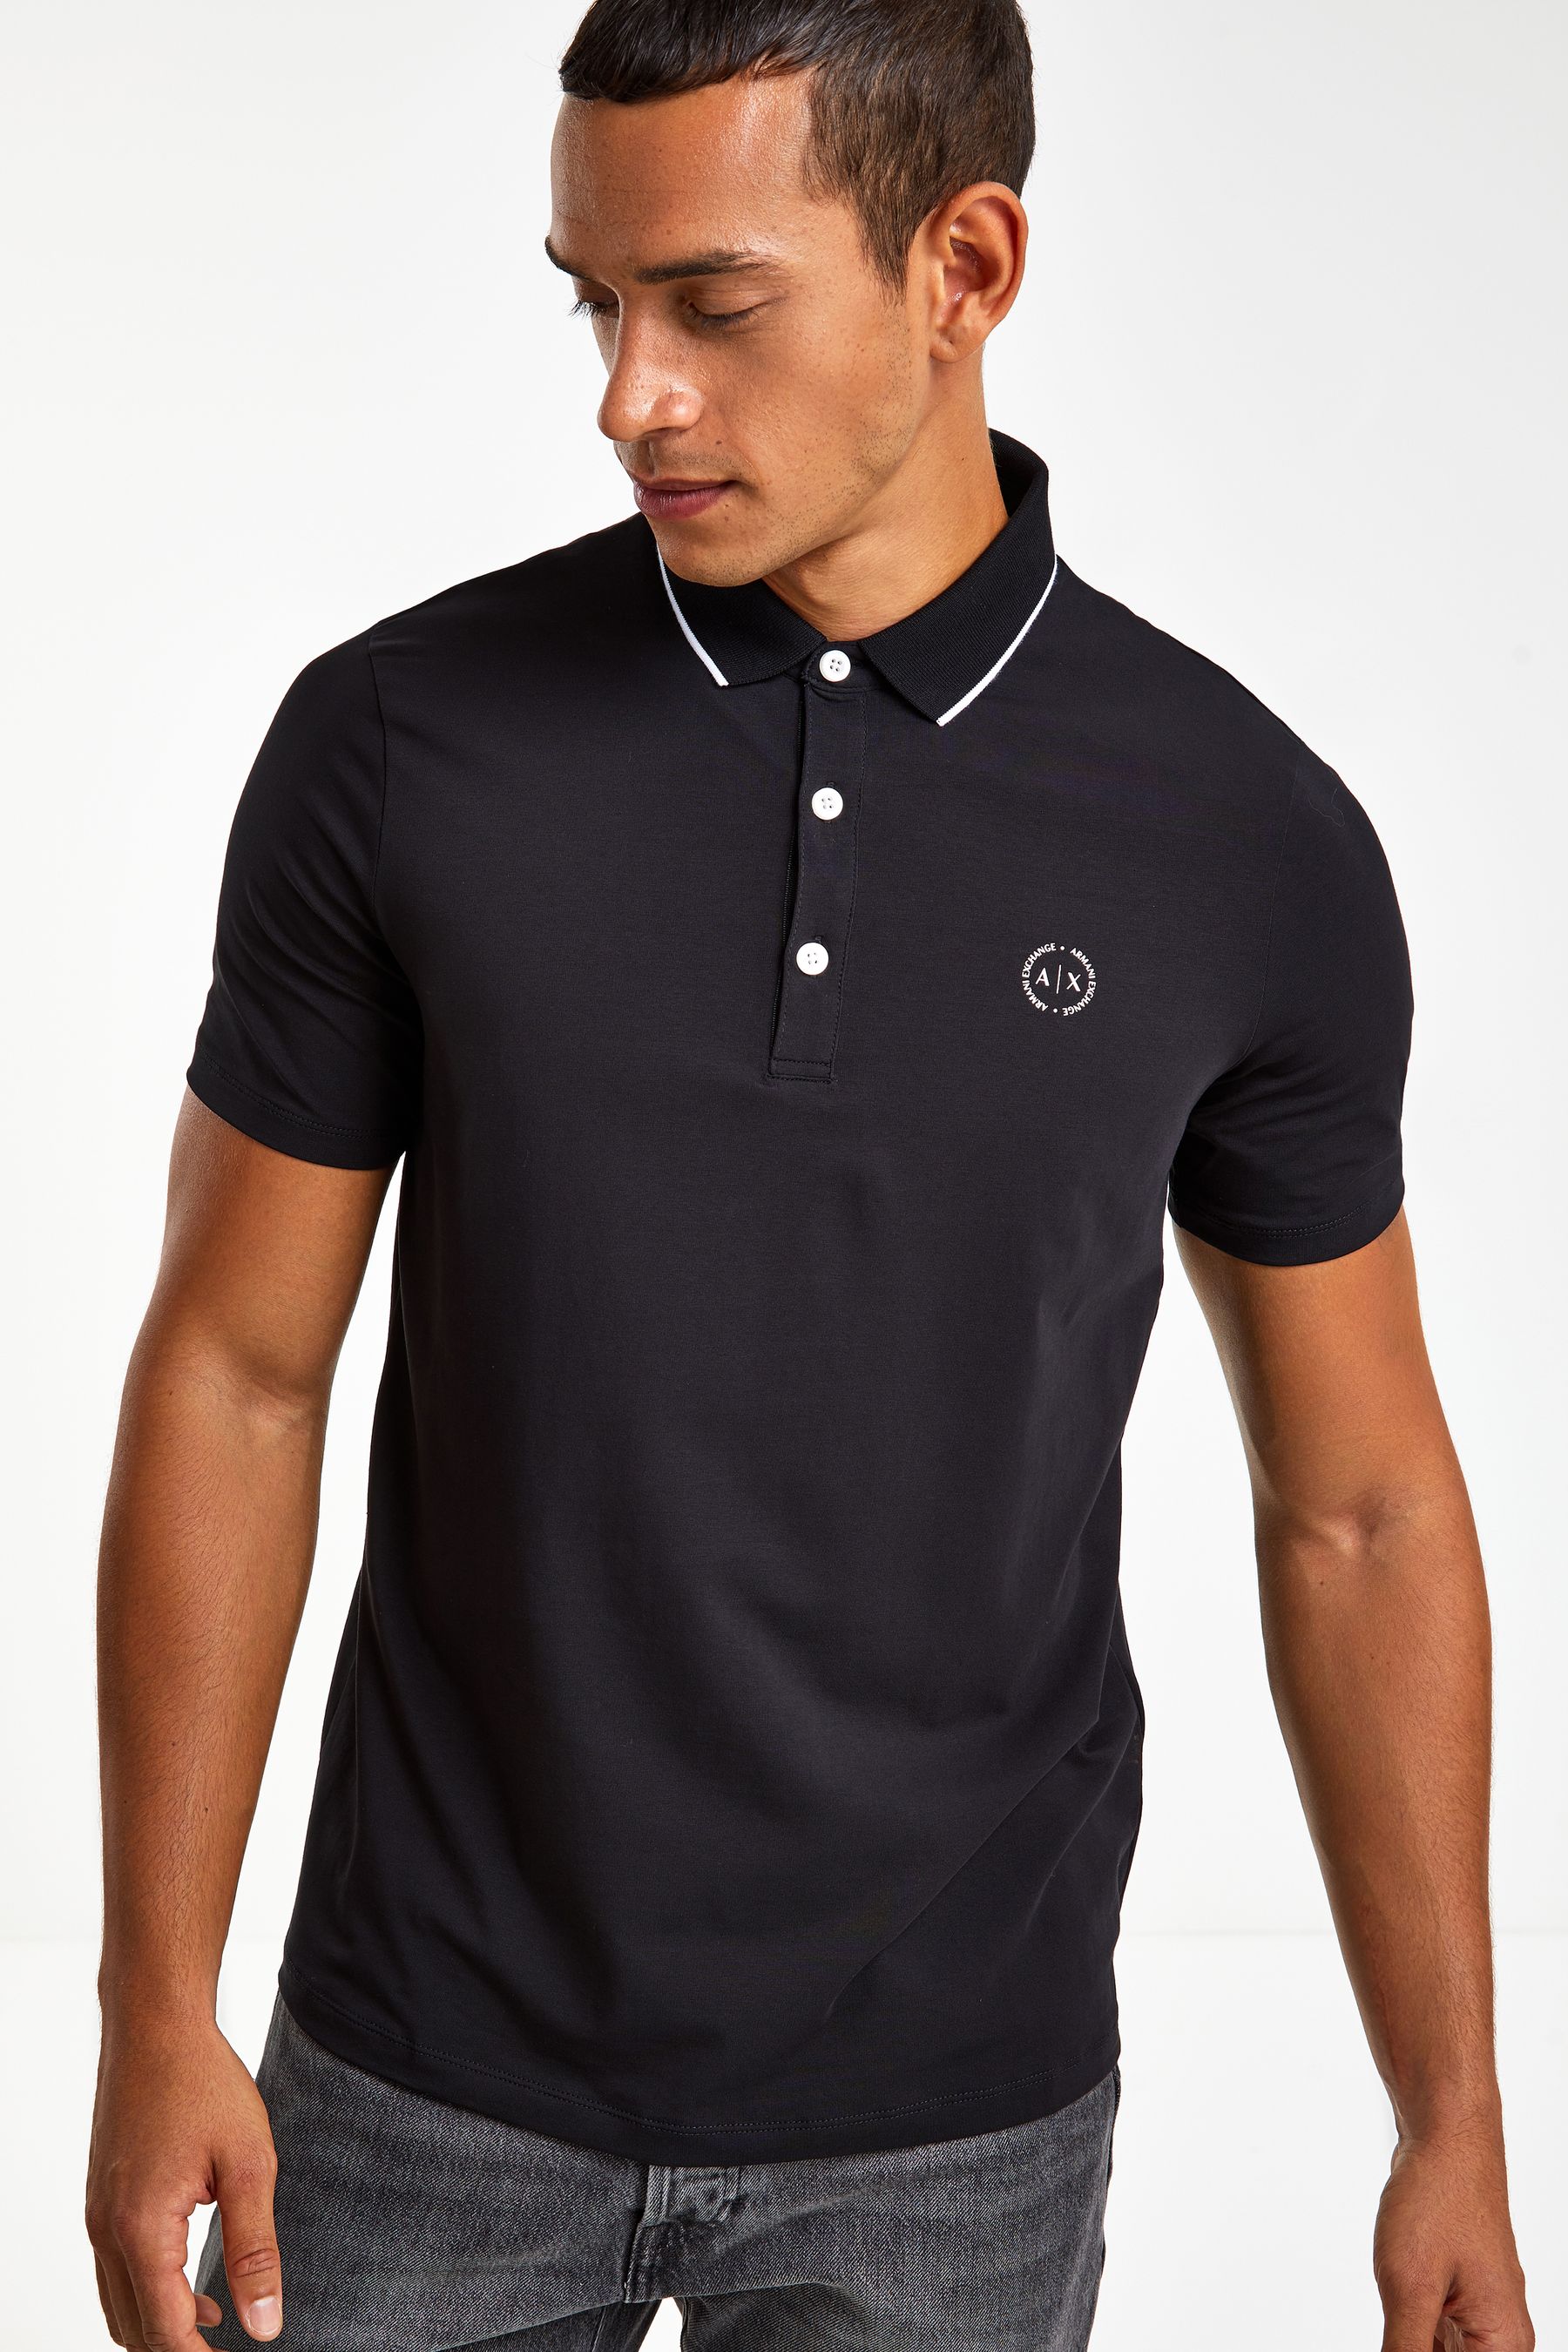 Buy Armani Exchange Tipped Polo Shirt from the Next UK online shop